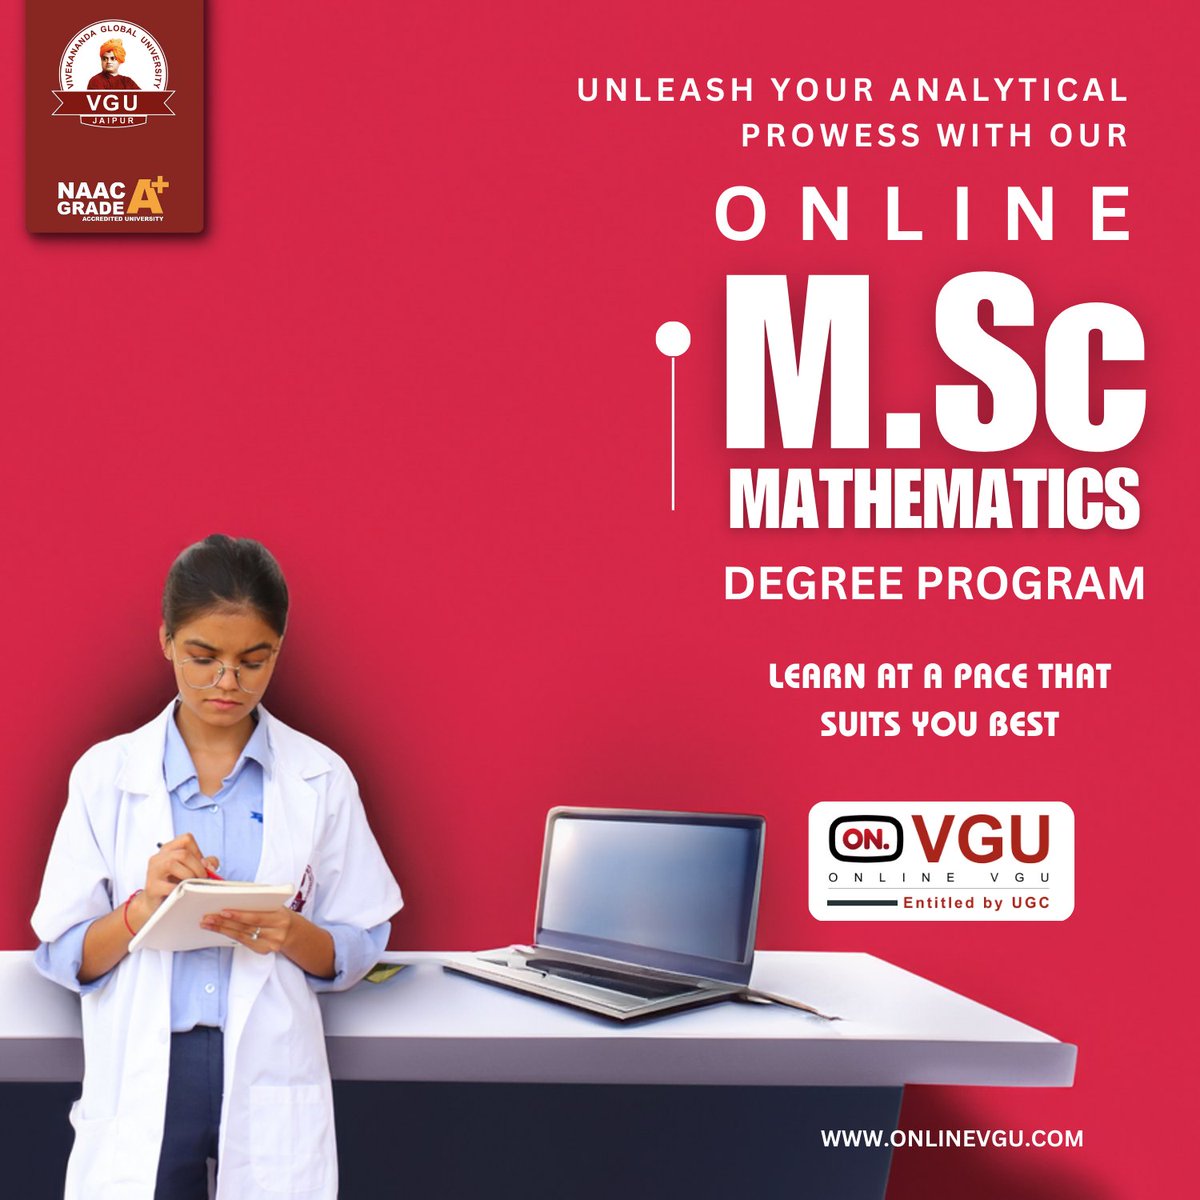 📚🌐 Learn at your own pace with Online M.Sc in Mathematics! Unleash your analytical prowess and take your problem-solving skills to the next level with our flexible degree program. 
💻 #OnlineLearning #MathematicsDegree #AnalyticalSkills #FlexibleEducation